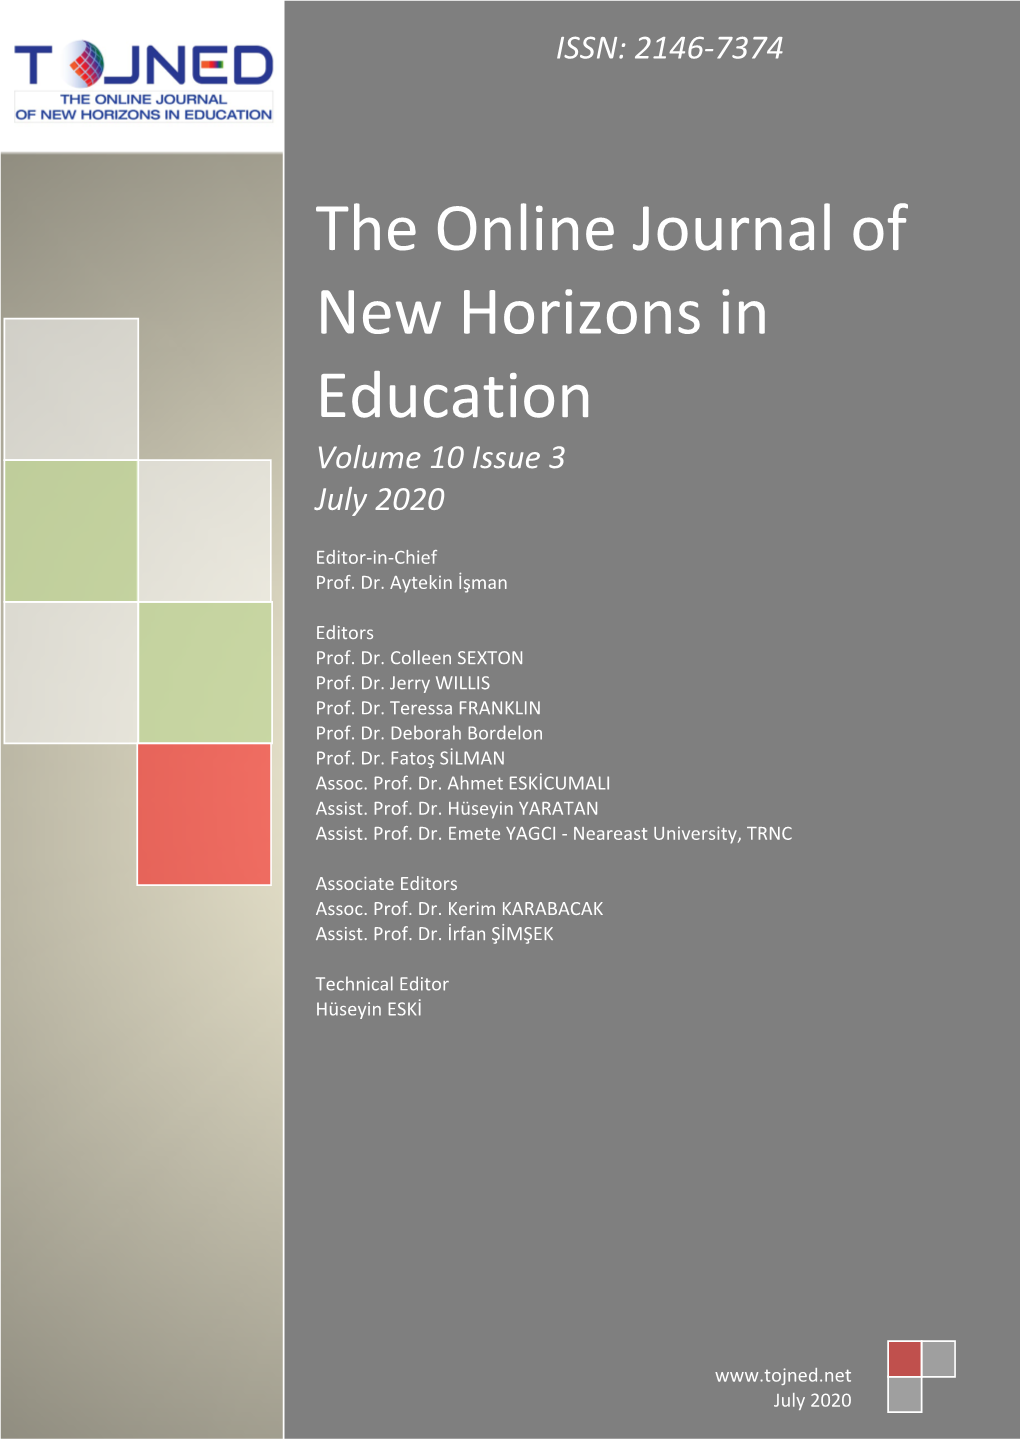 The Online Journal of New Horizons in Education Volume 10 Issue 3 July 2020